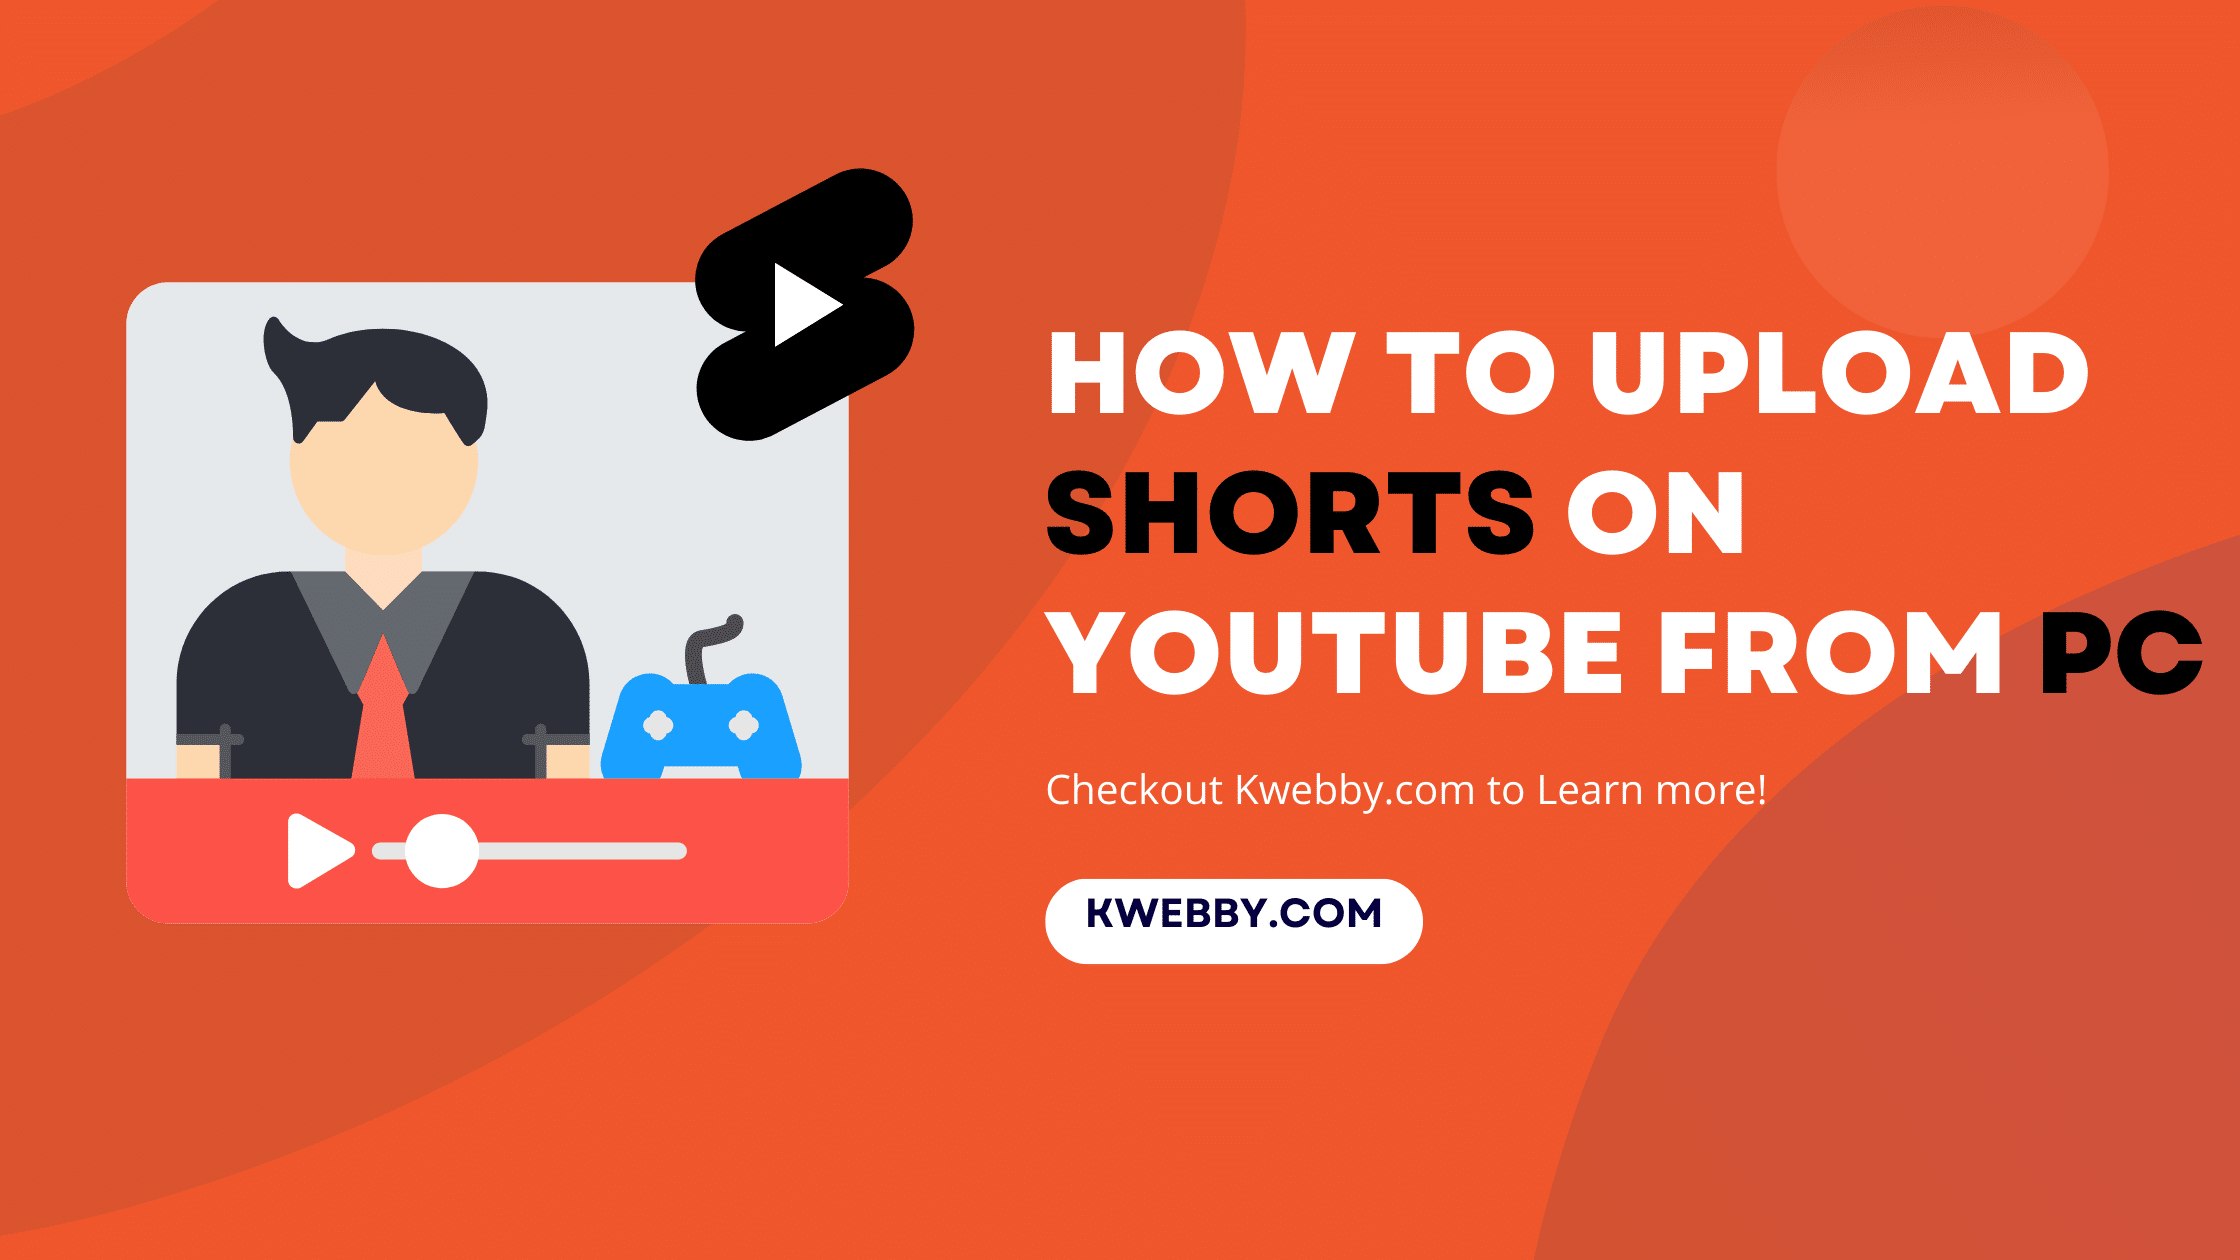 How to Upload Shorts on YouTube from PC